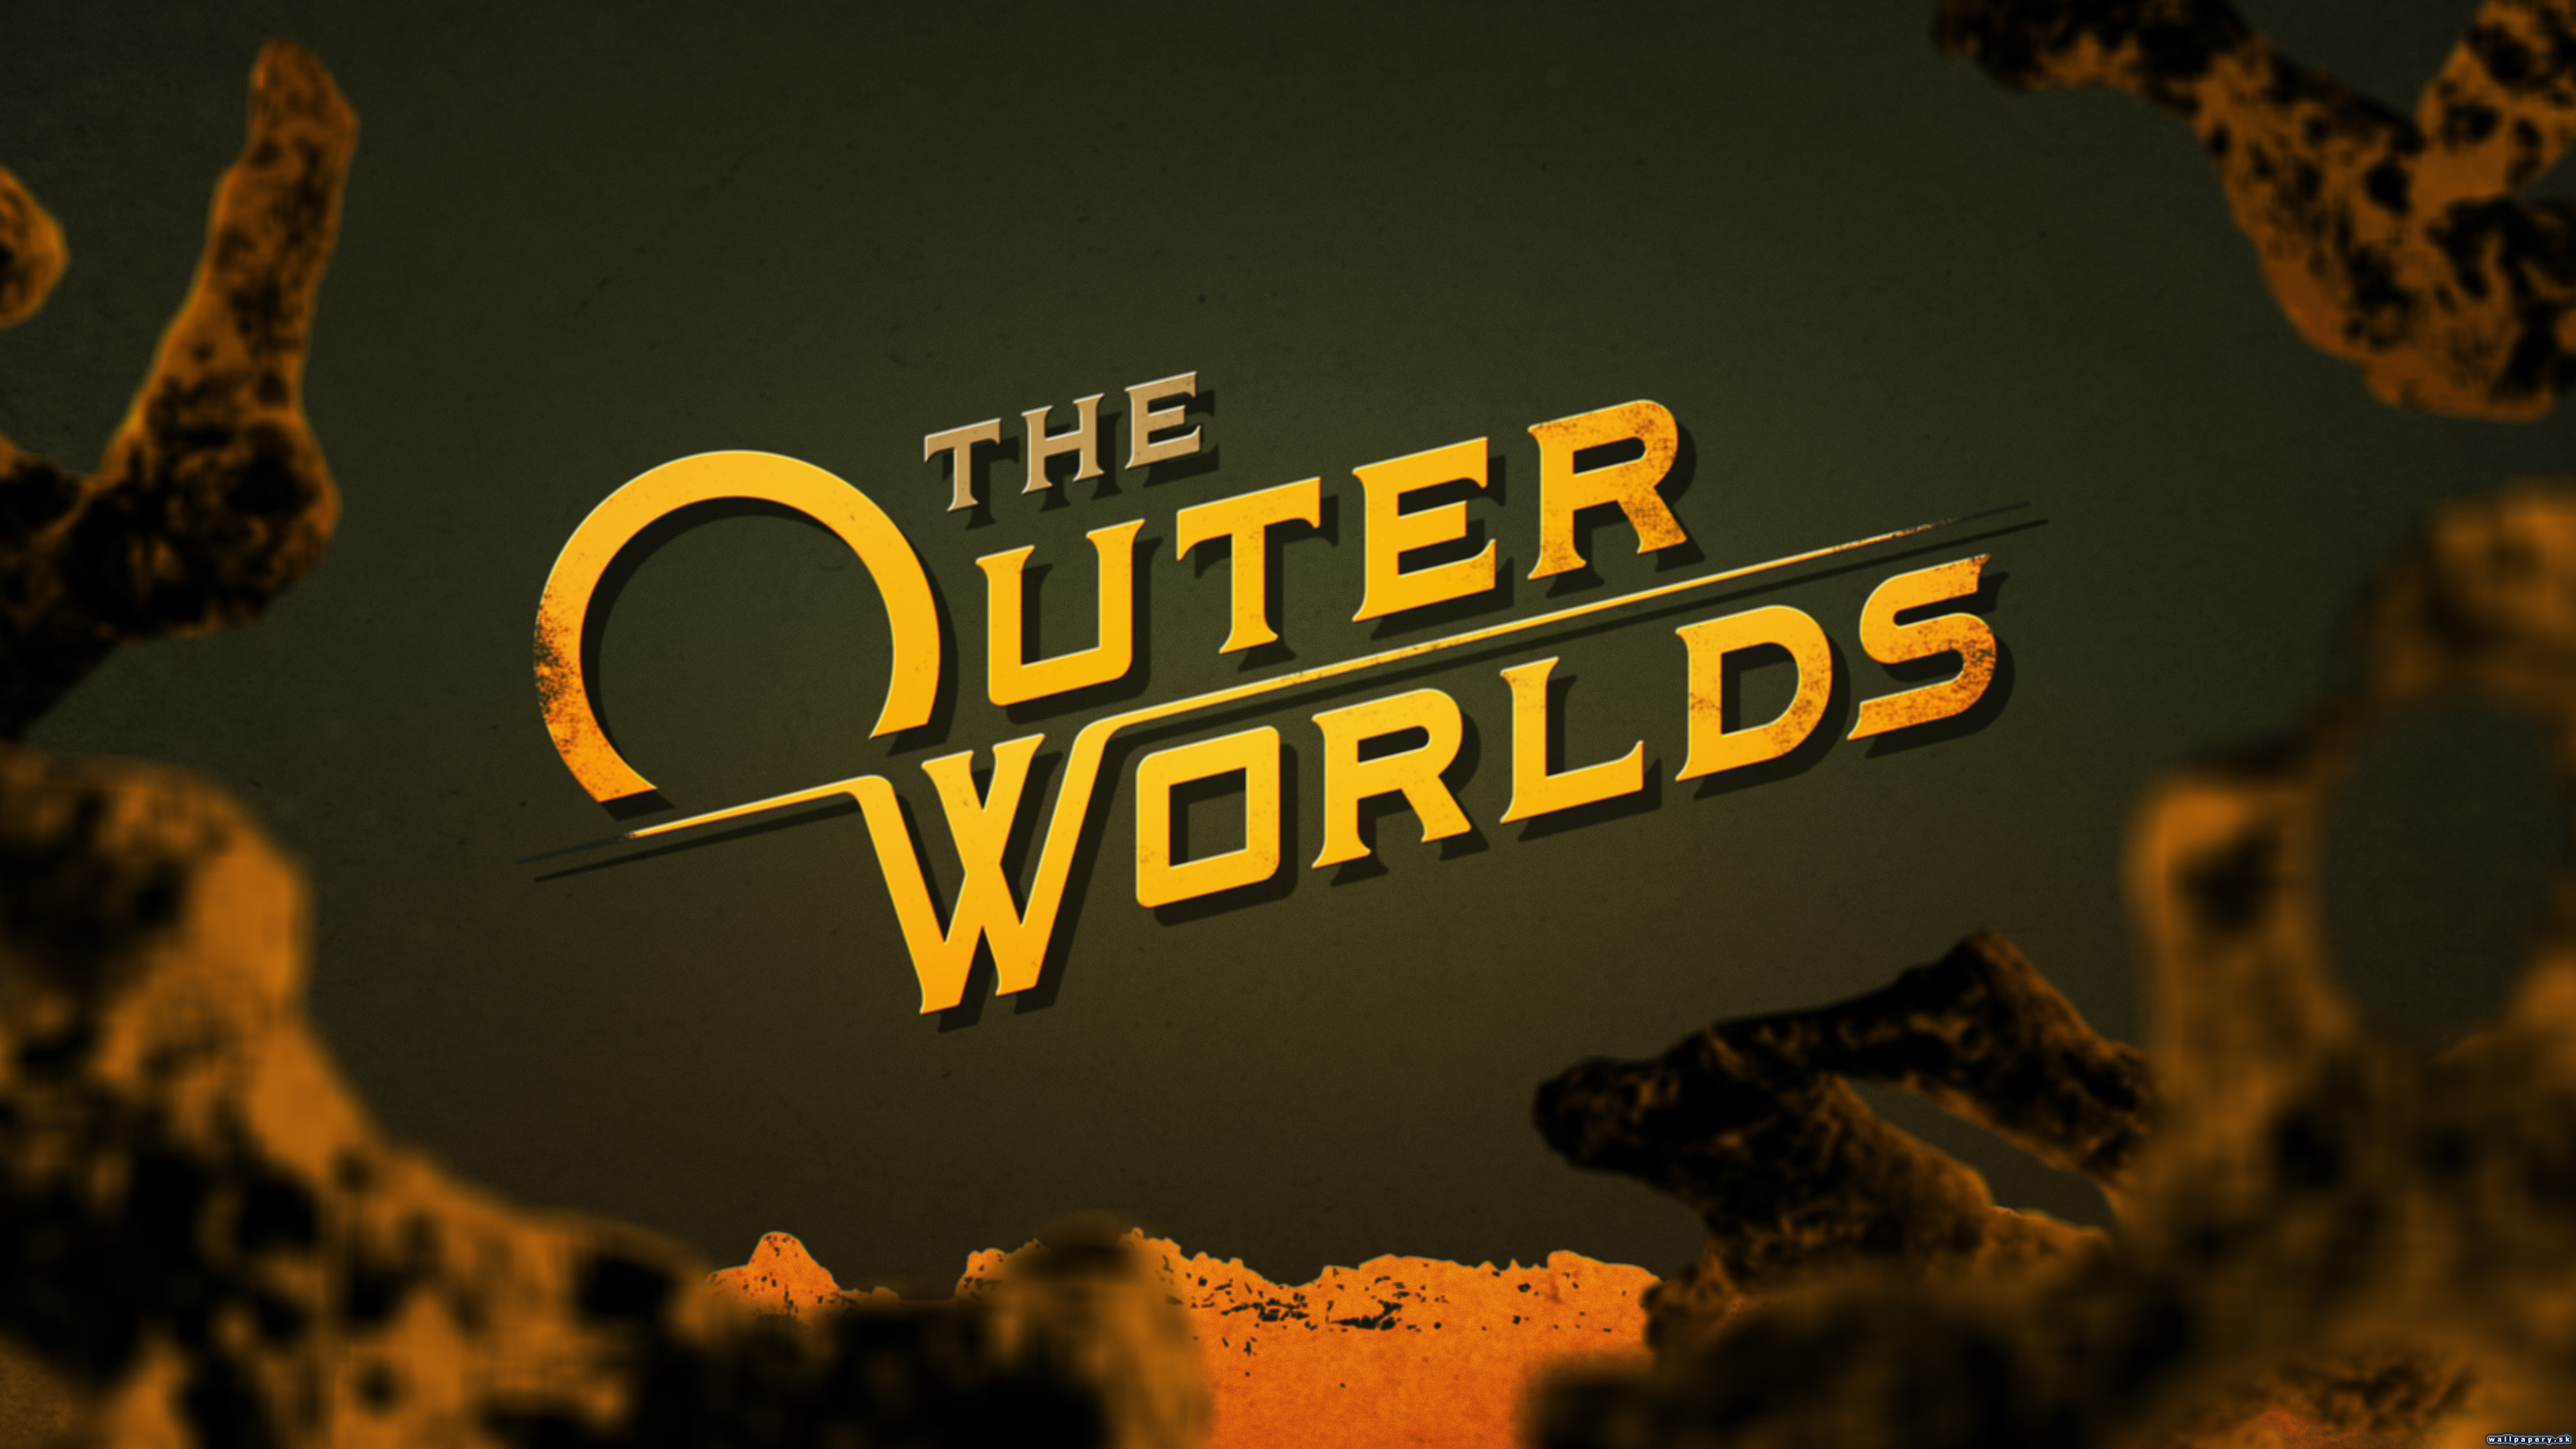 The Outer Worlds - wallpaper 3